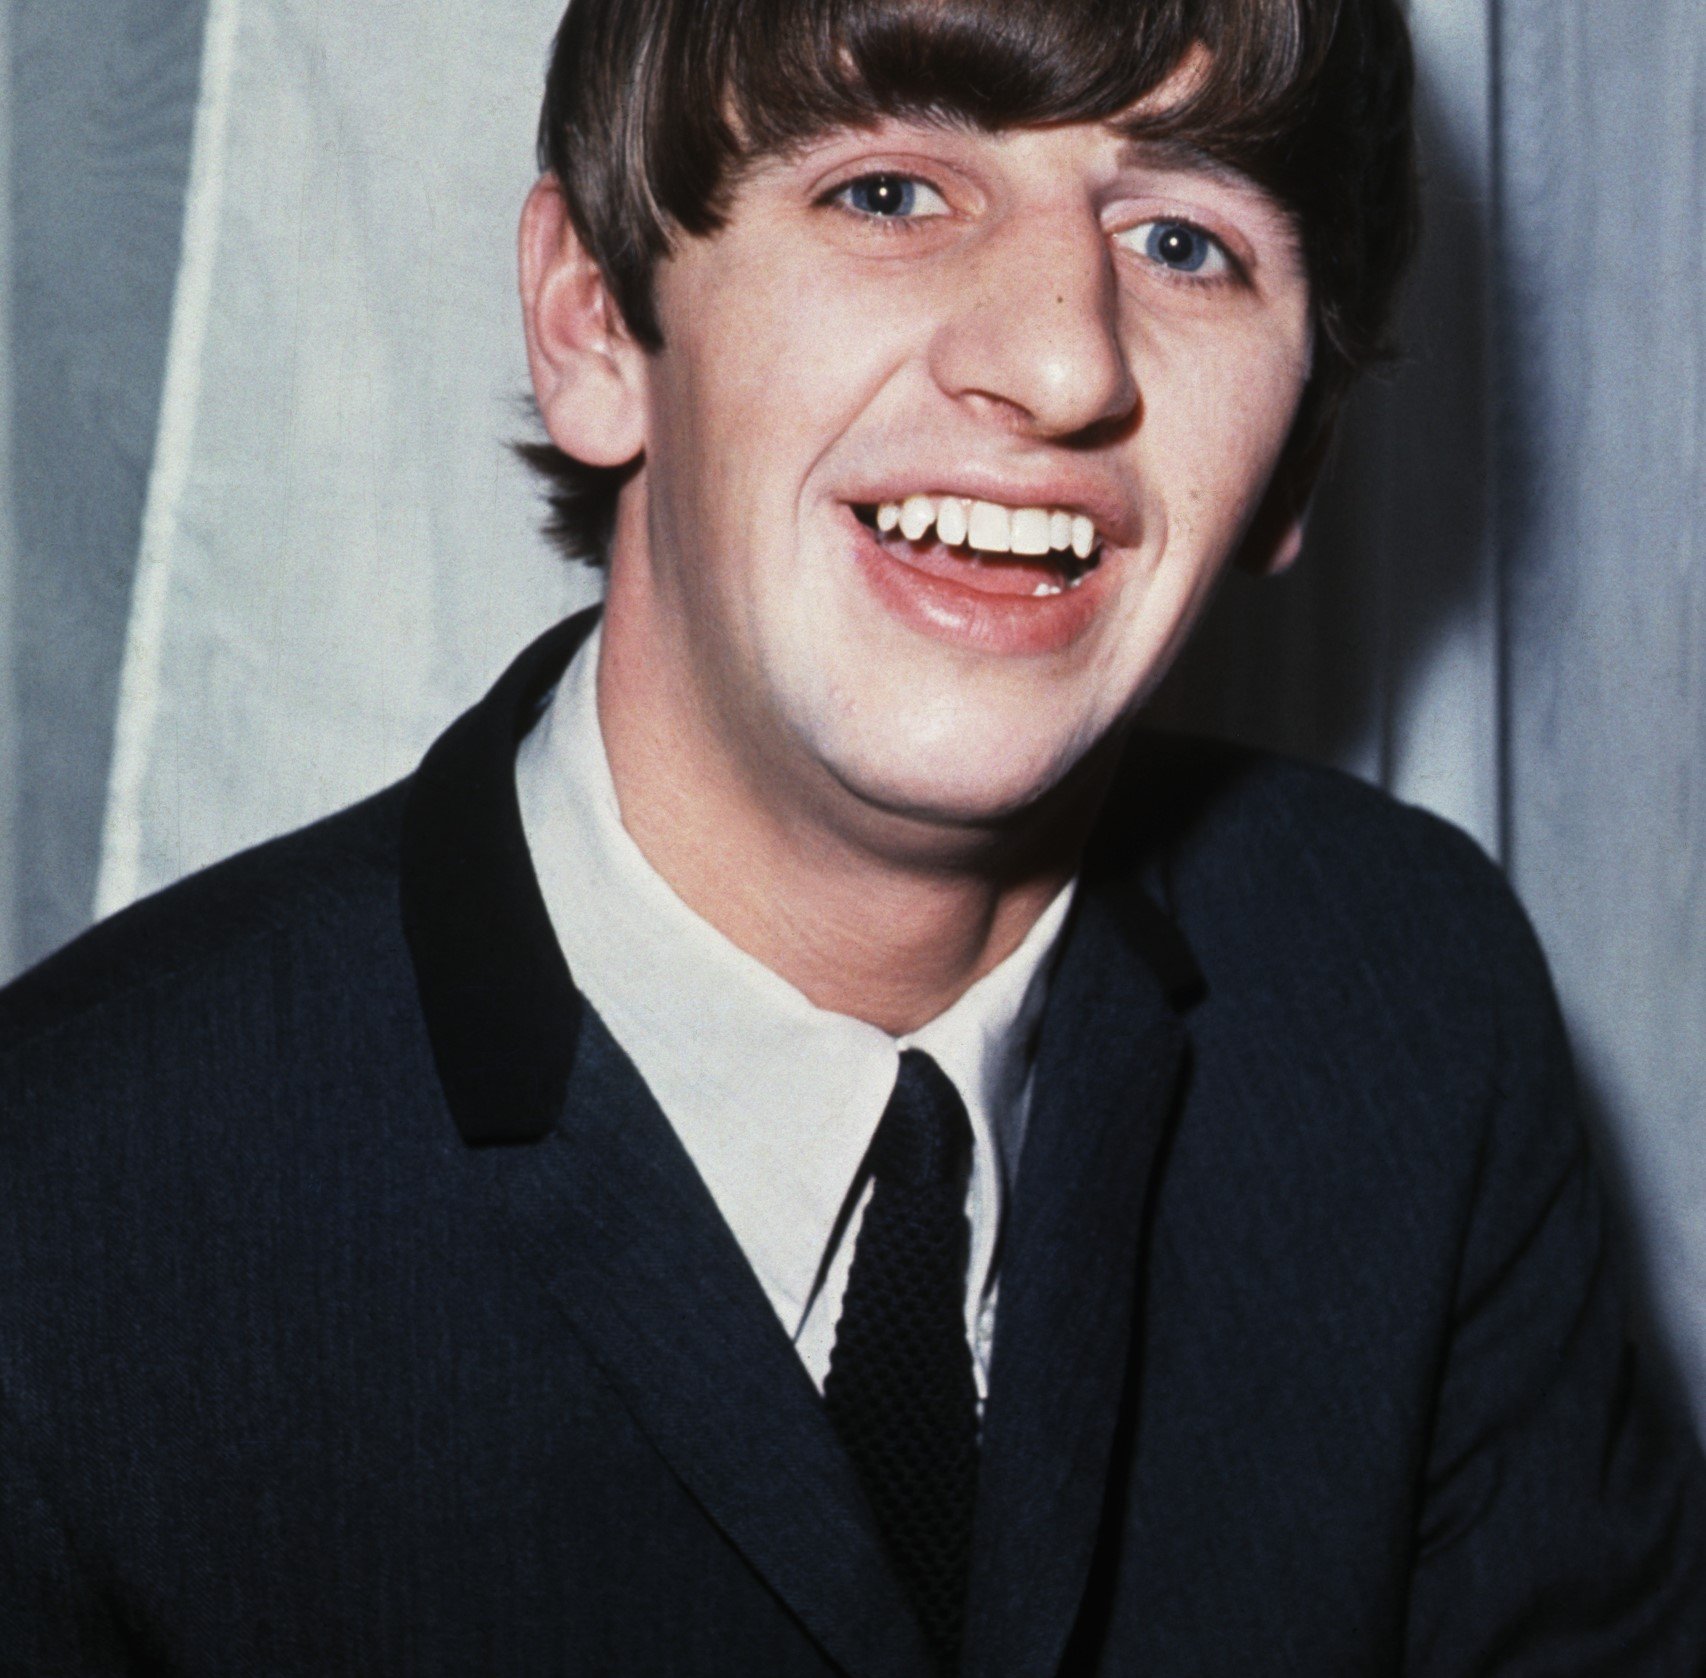 Ringo Starr Covered 1 of the Songs He Bought as a Kid After The